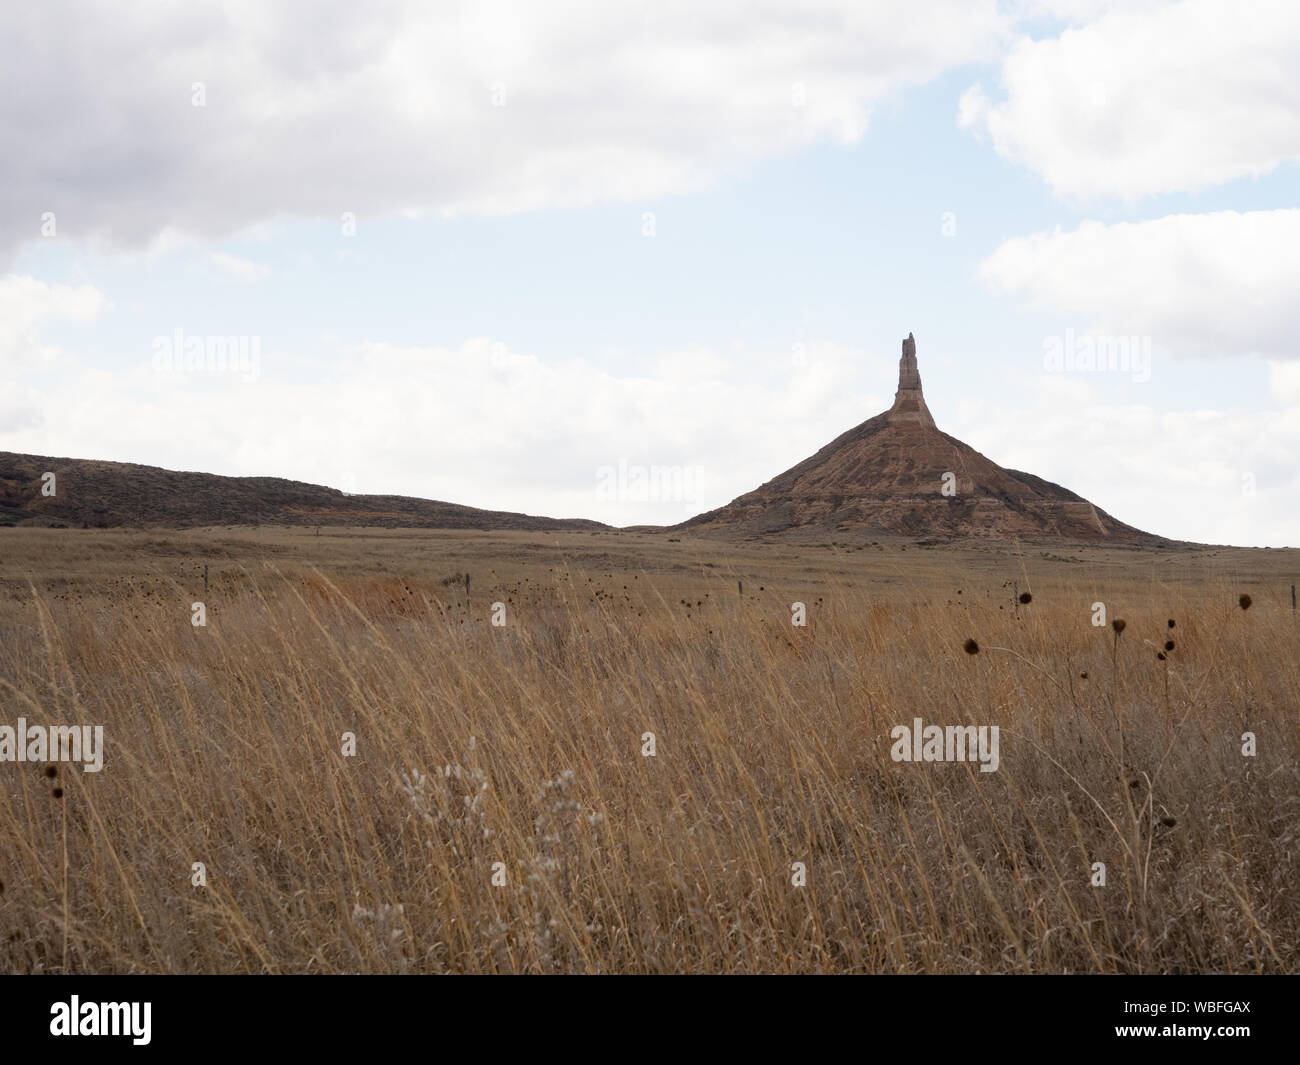 Chimney Rock National Historic Site in Nebraska with field with dried vegetation in the foreground. Cloudy skies above. Stock Photo